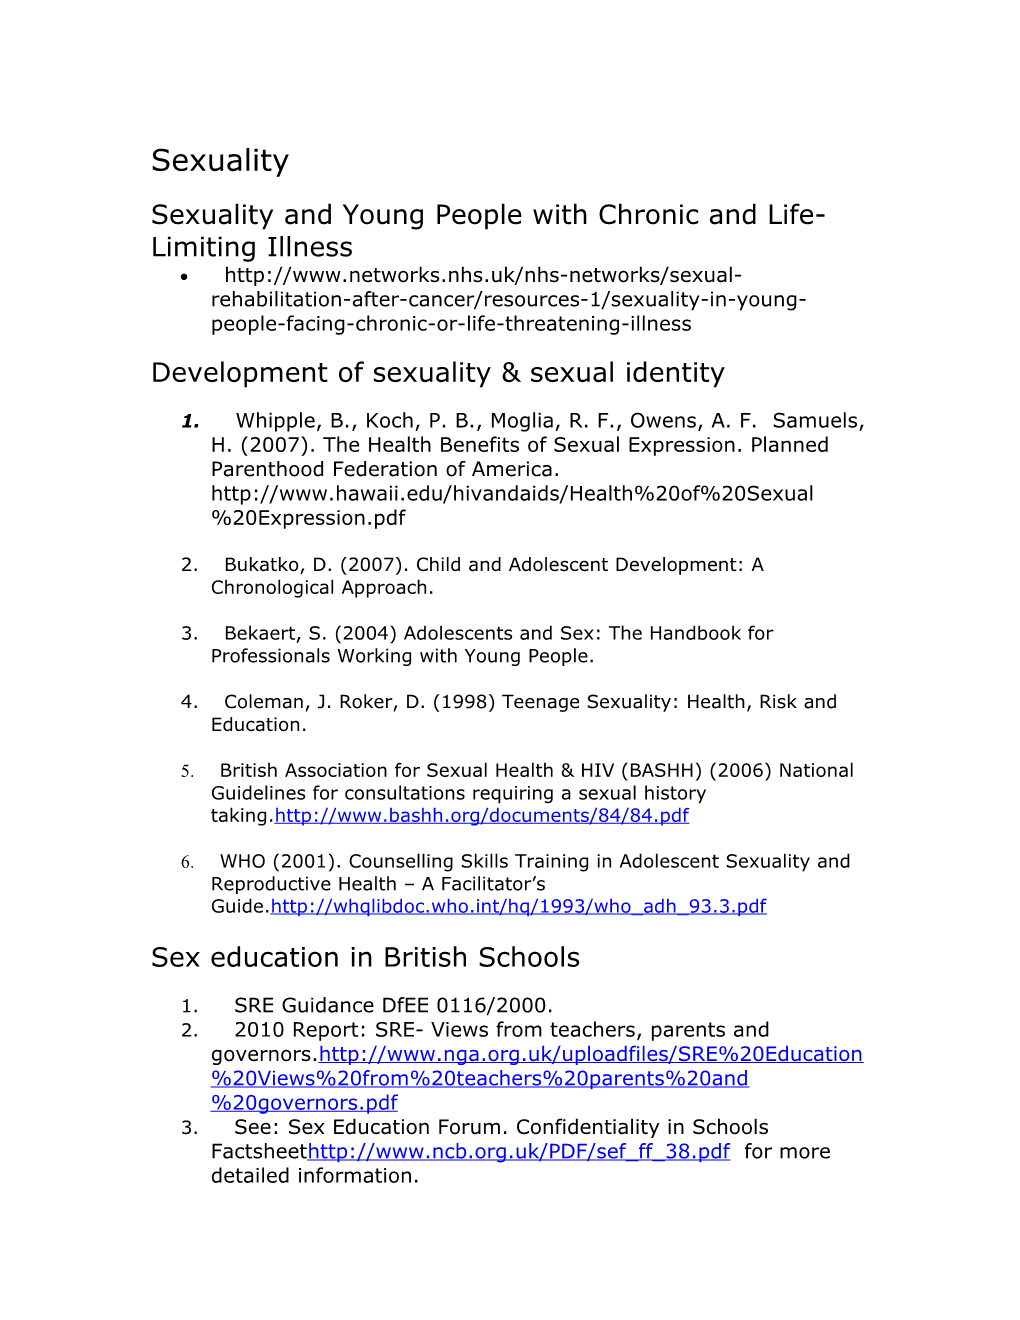 Sexuality and Young People with Chronic and Life-Limiting Illness